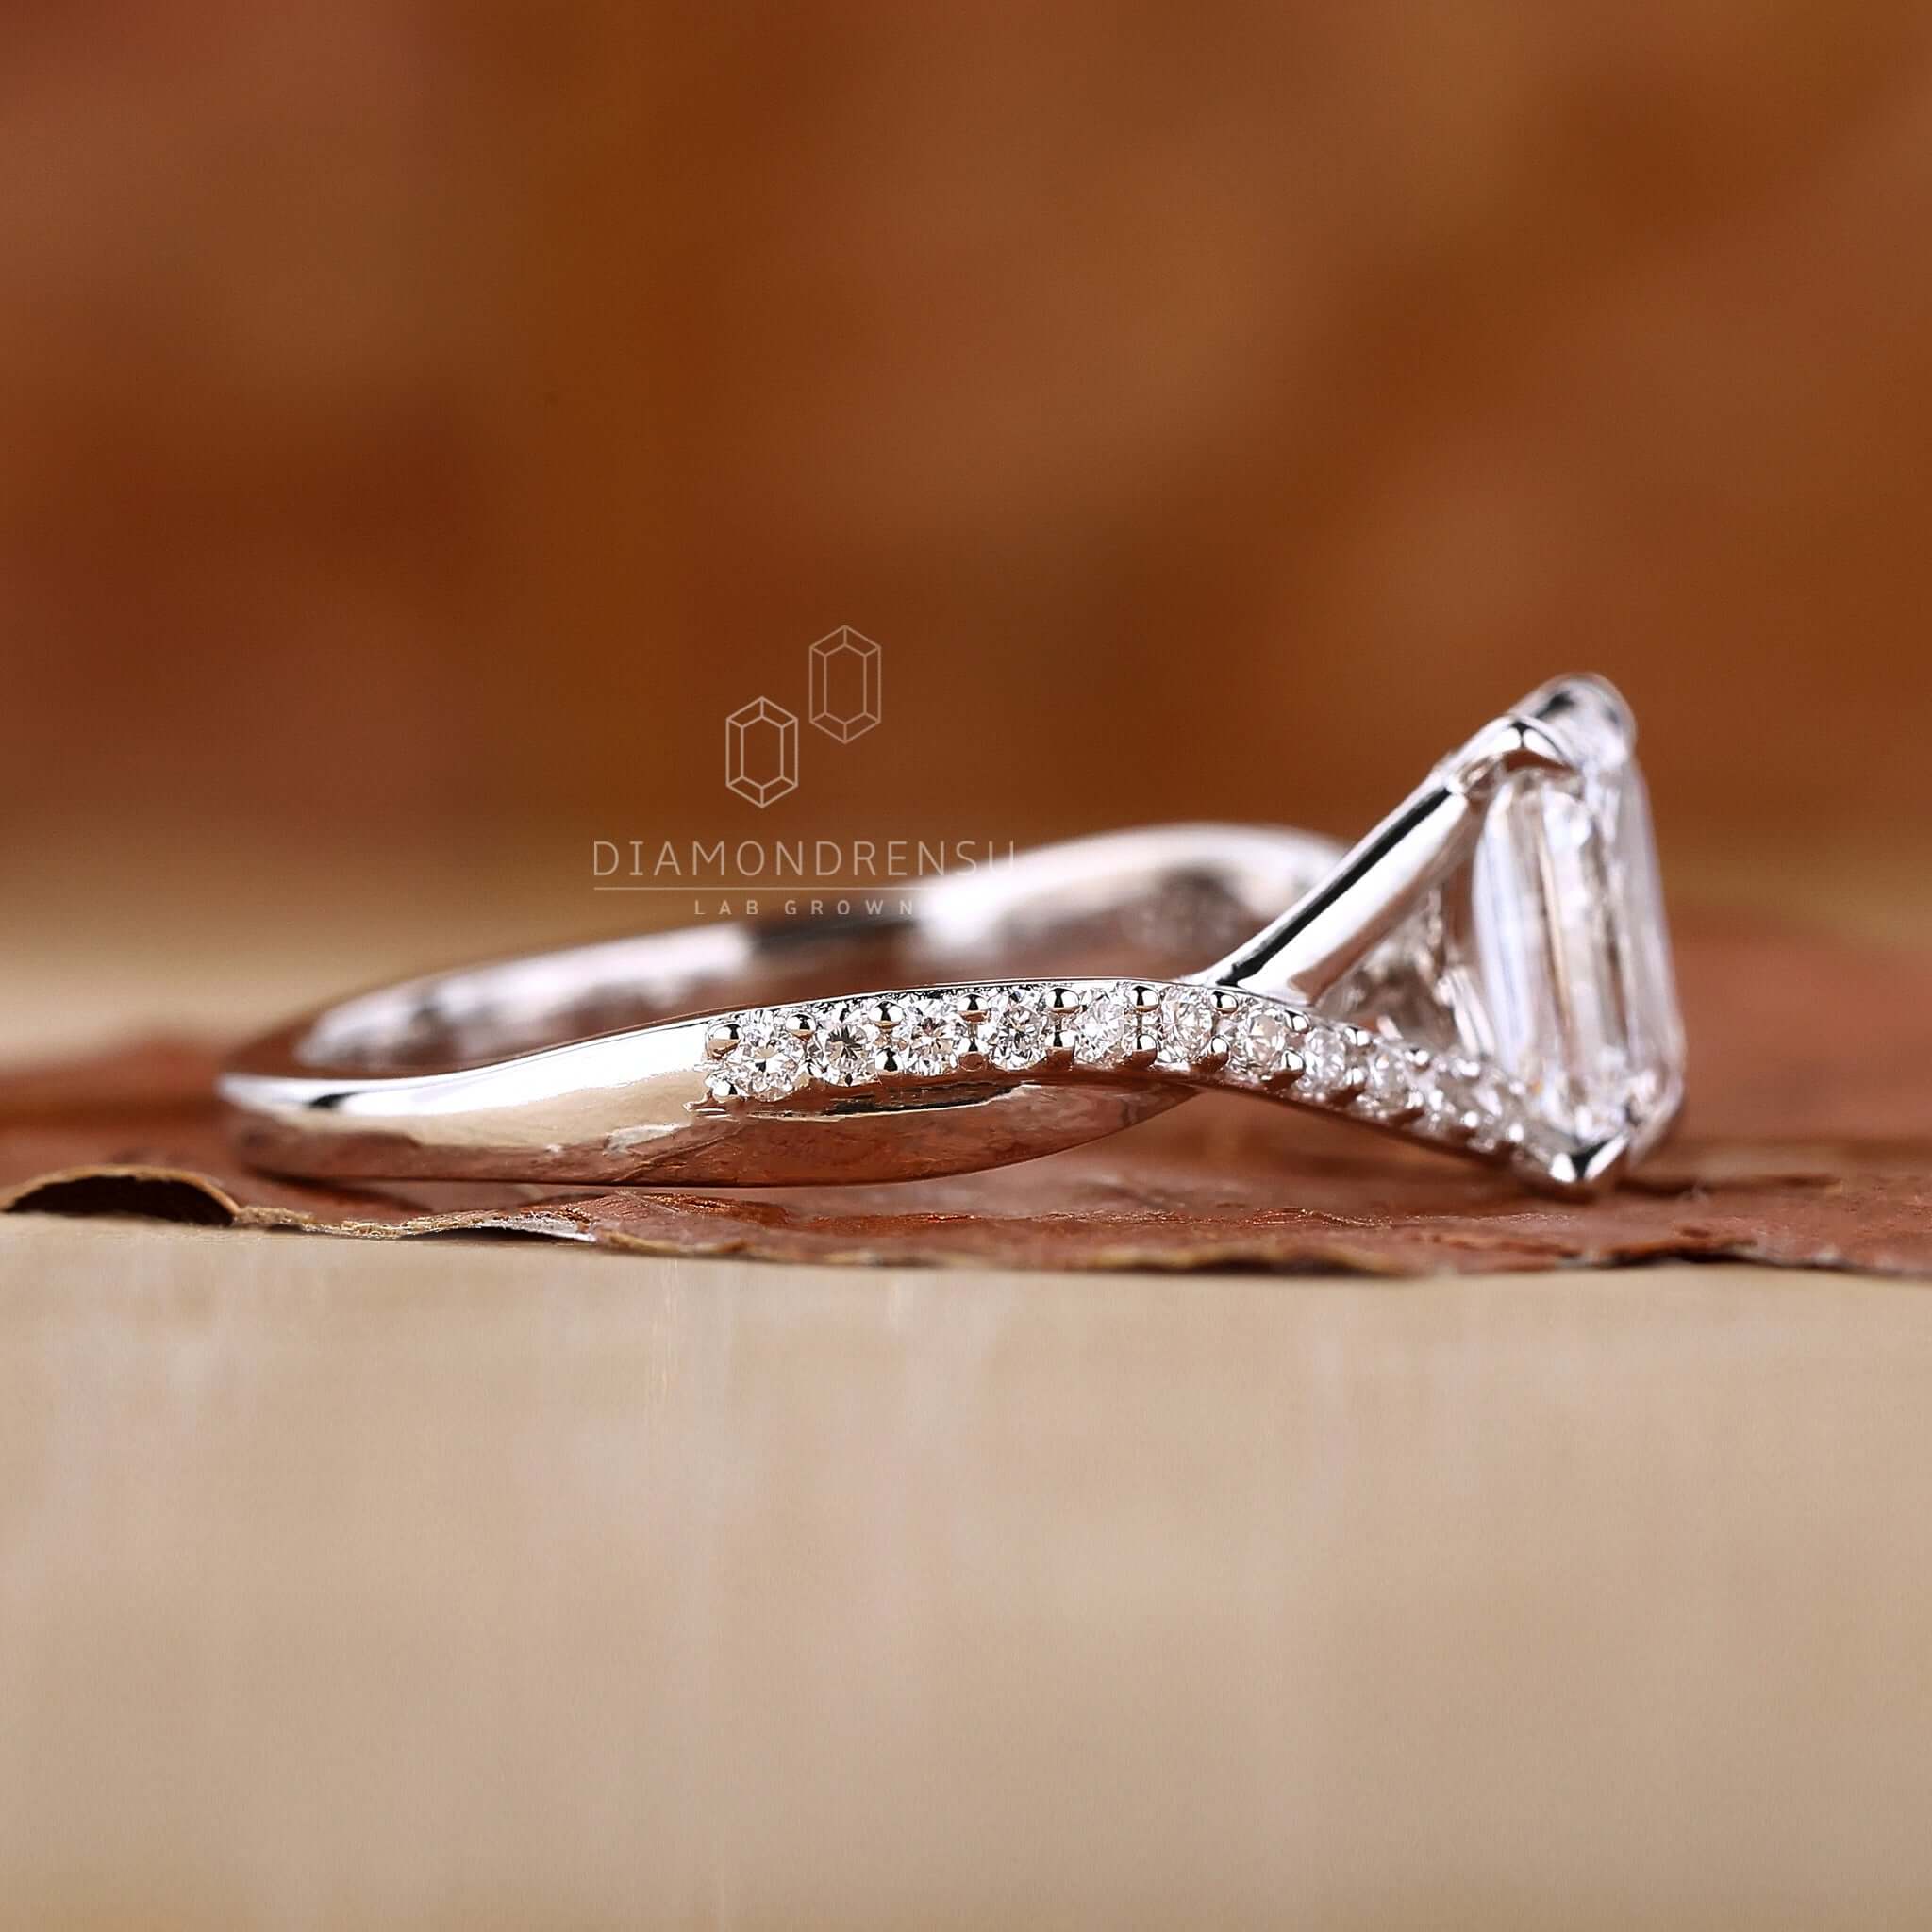 Eco-friendly lab-grown emerald cut diamond, showcasing its ethical and brilliant beauty.